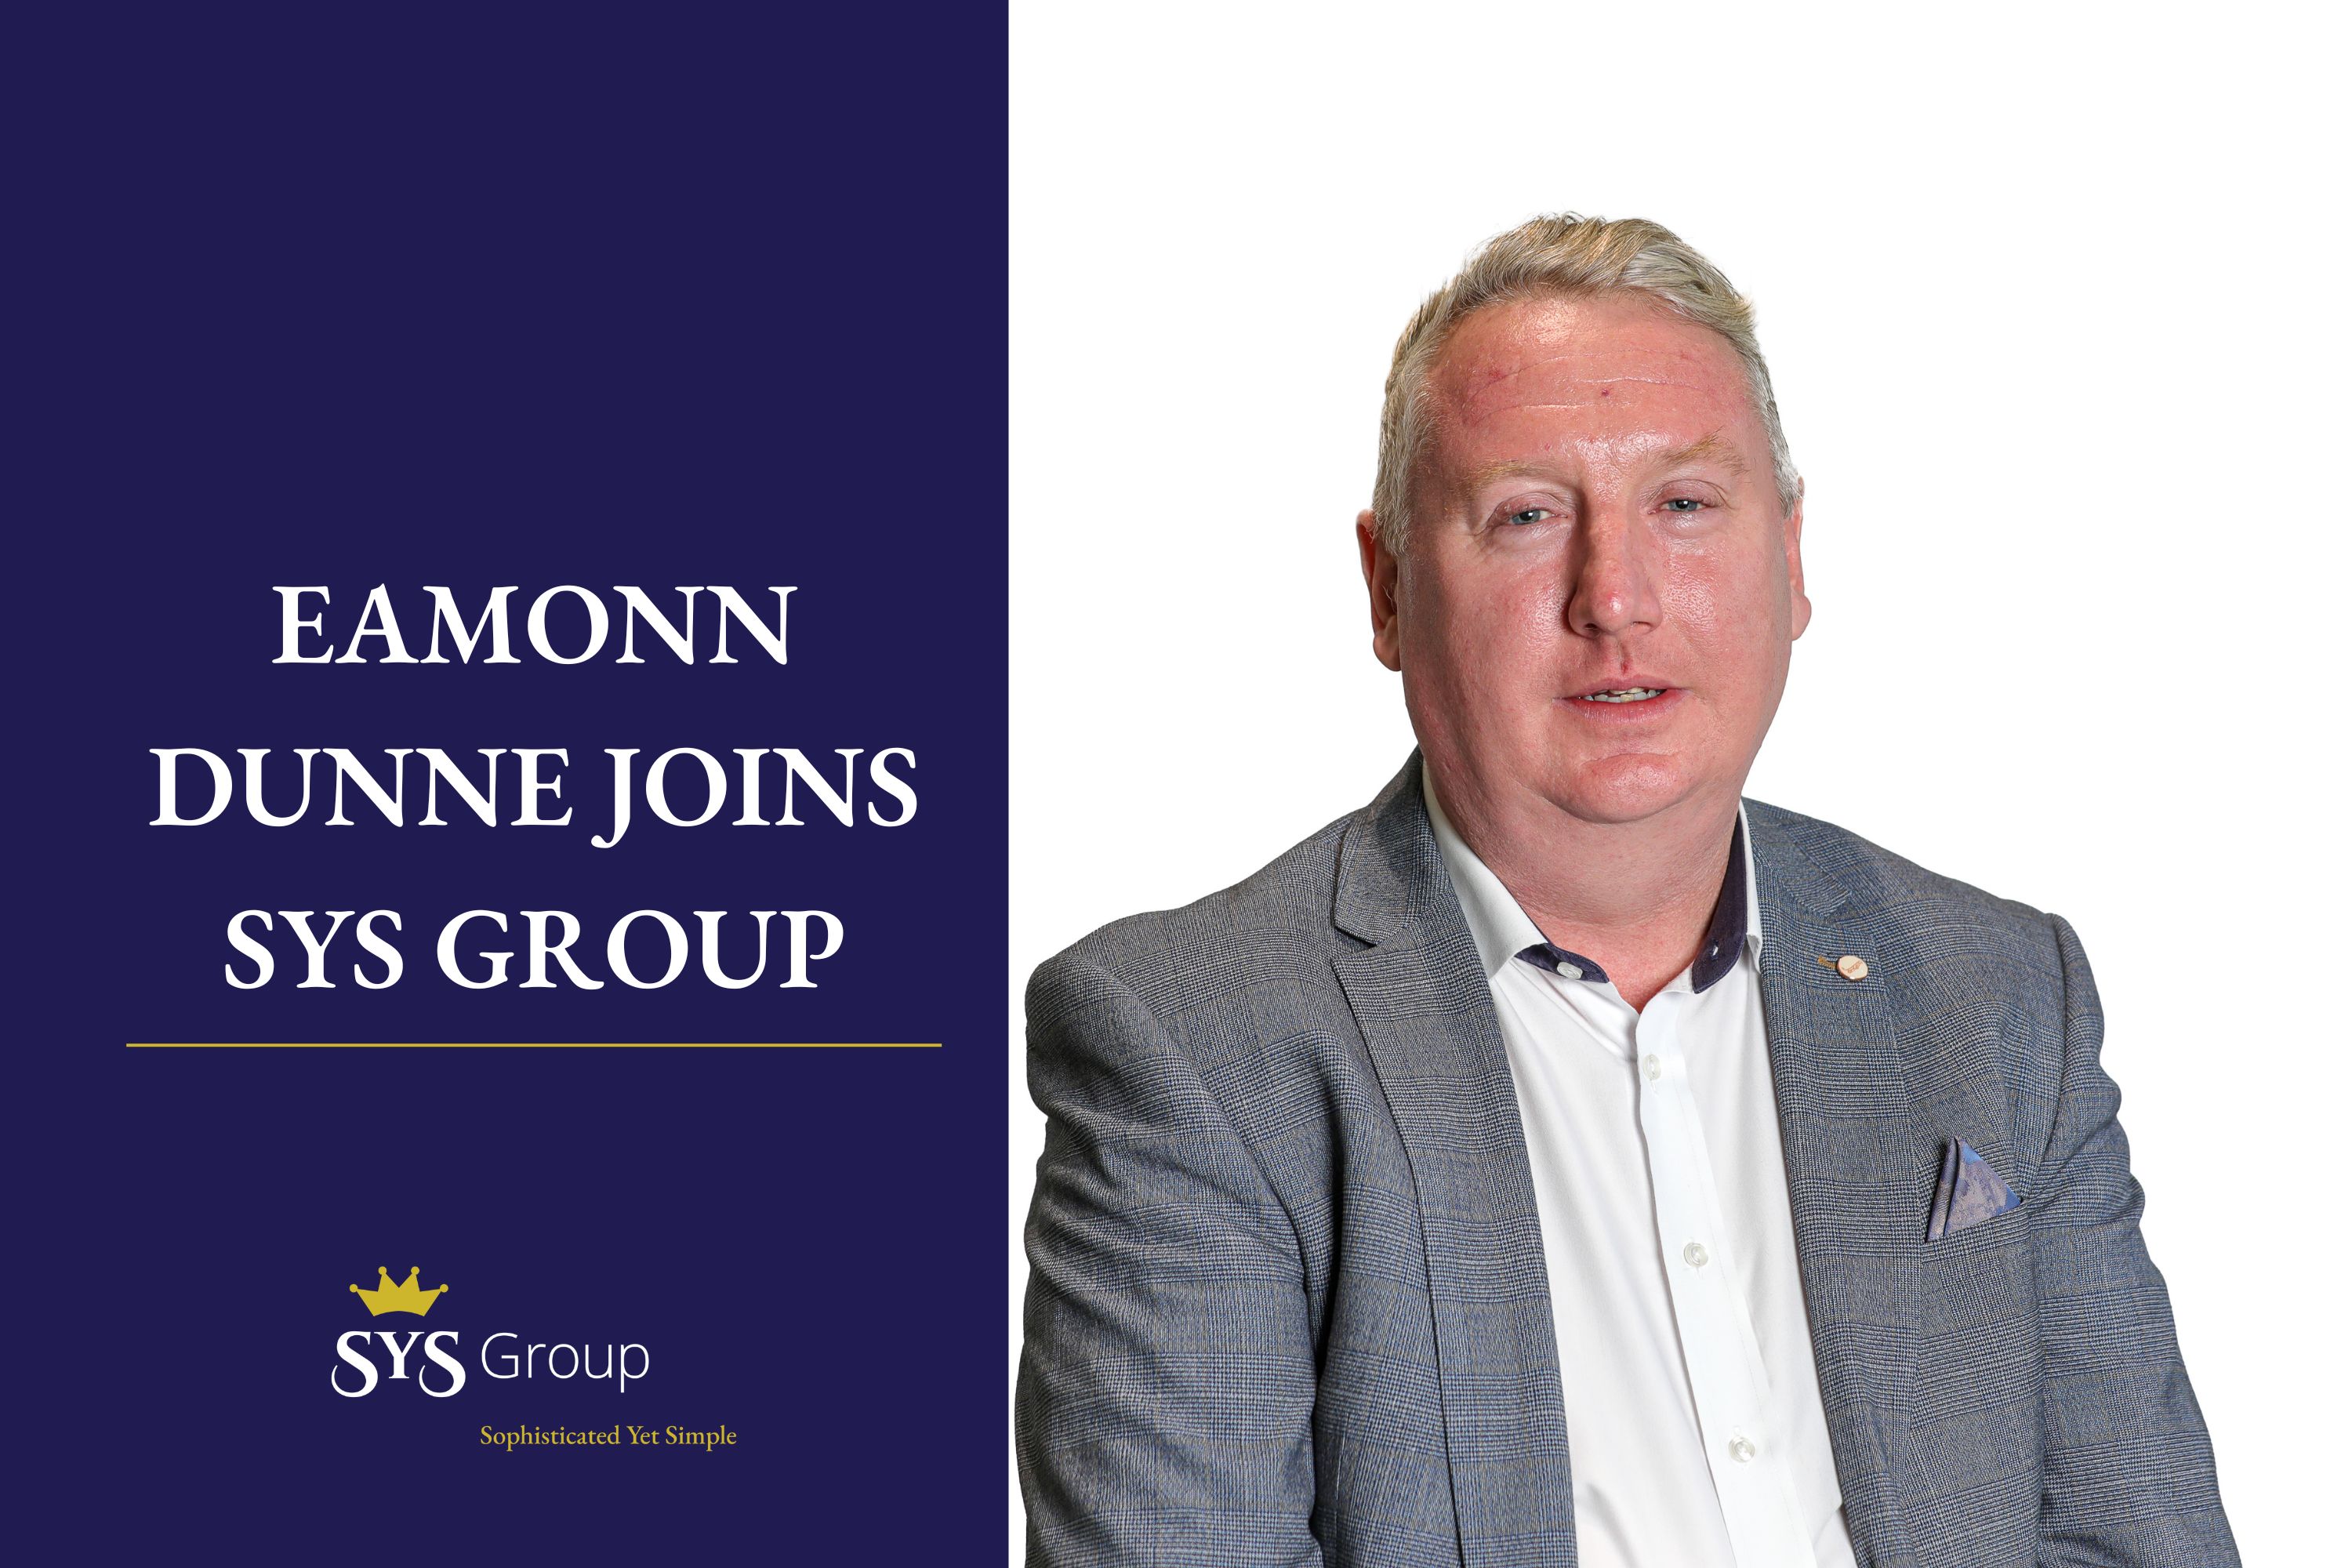 Eamonn Dunne Joins SYS Group